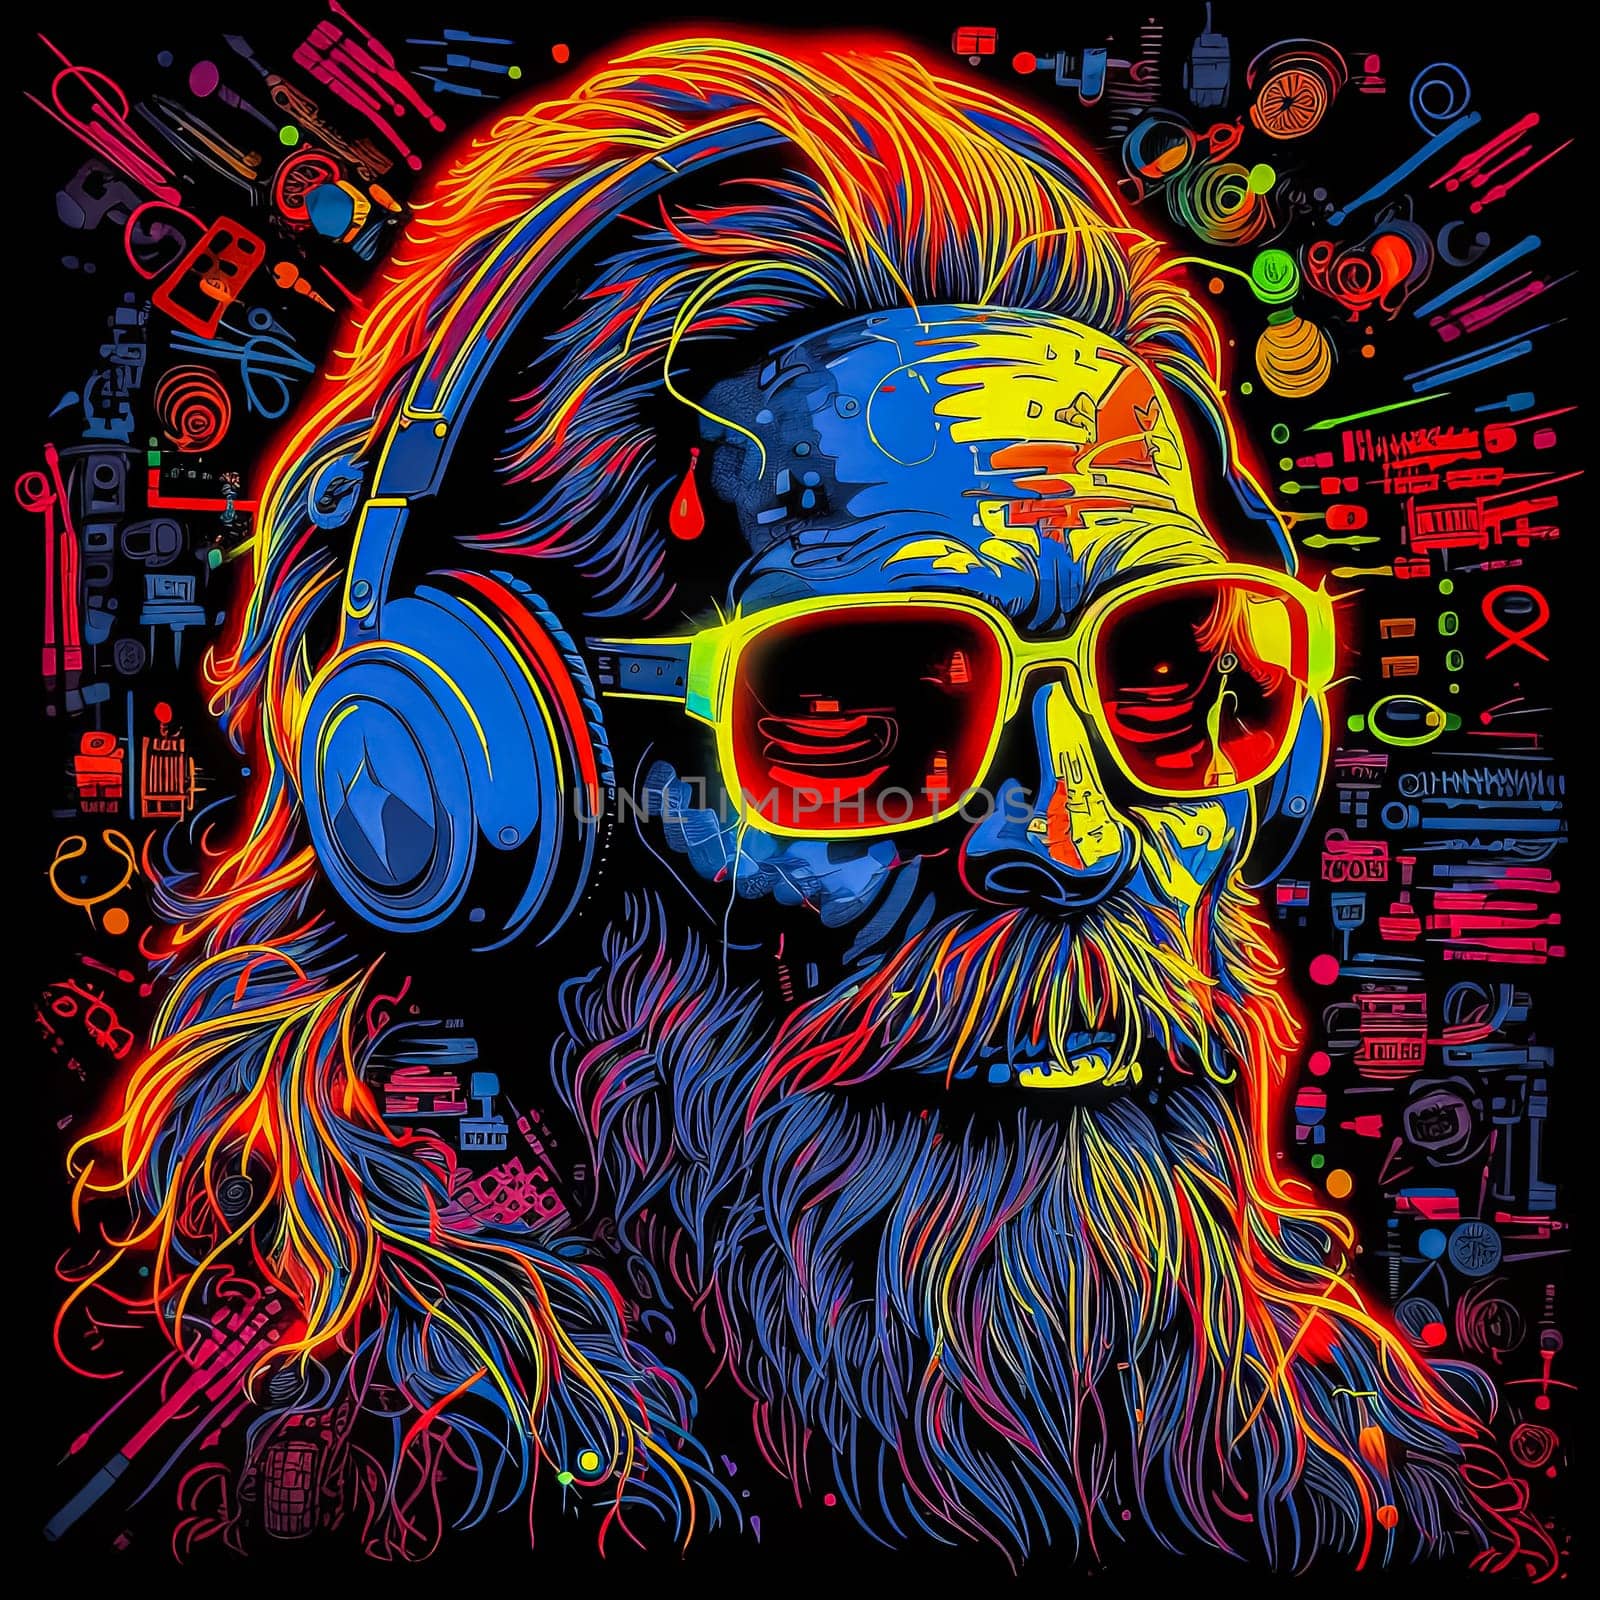 A man with a beard and sunglasses is wearing headphones. The image has a cool, futuristic vibe